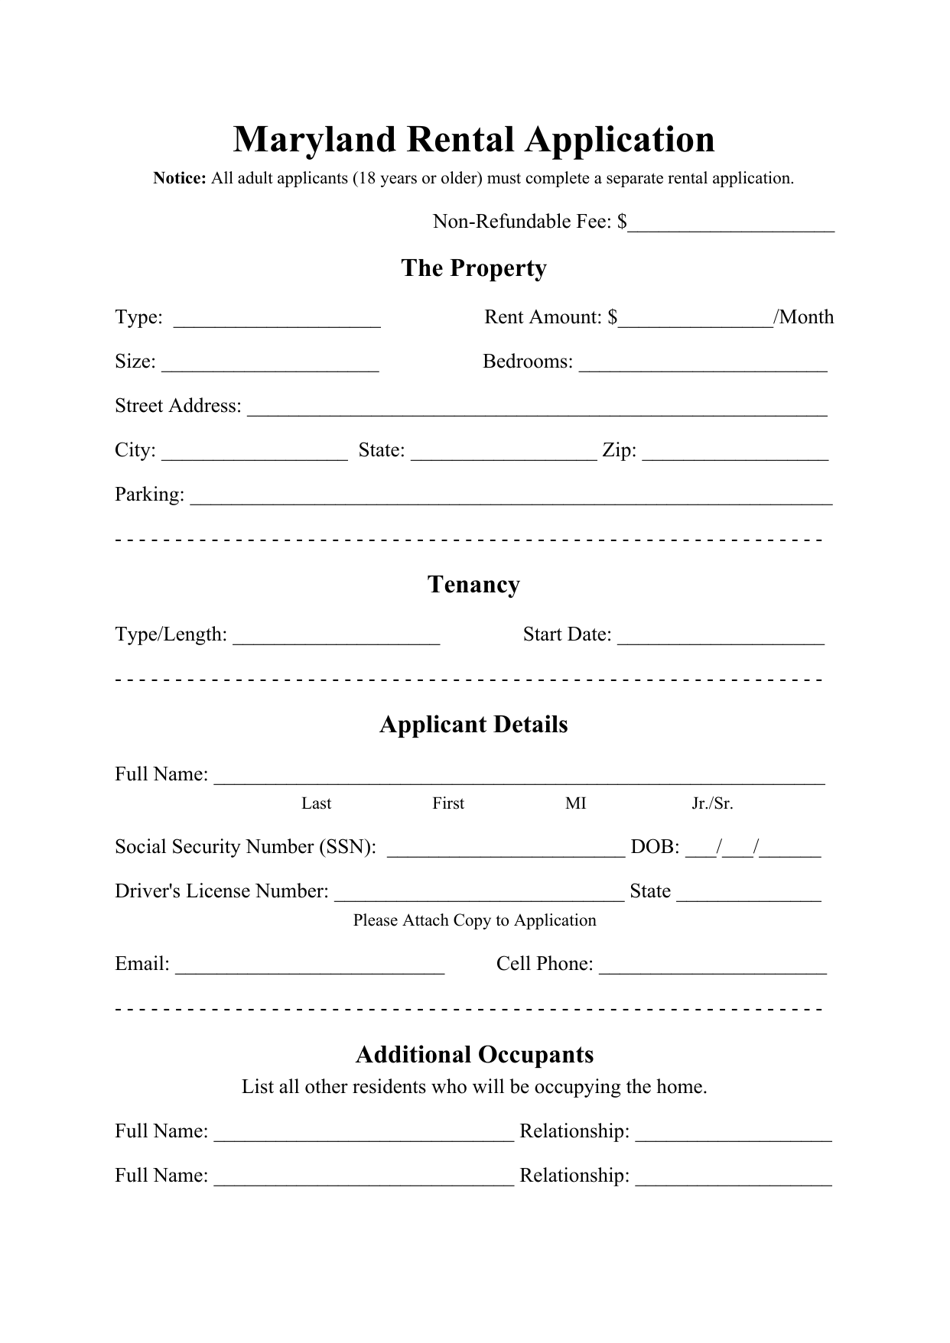 maryland-rental-application-form-fill-out-sign-online-and-download